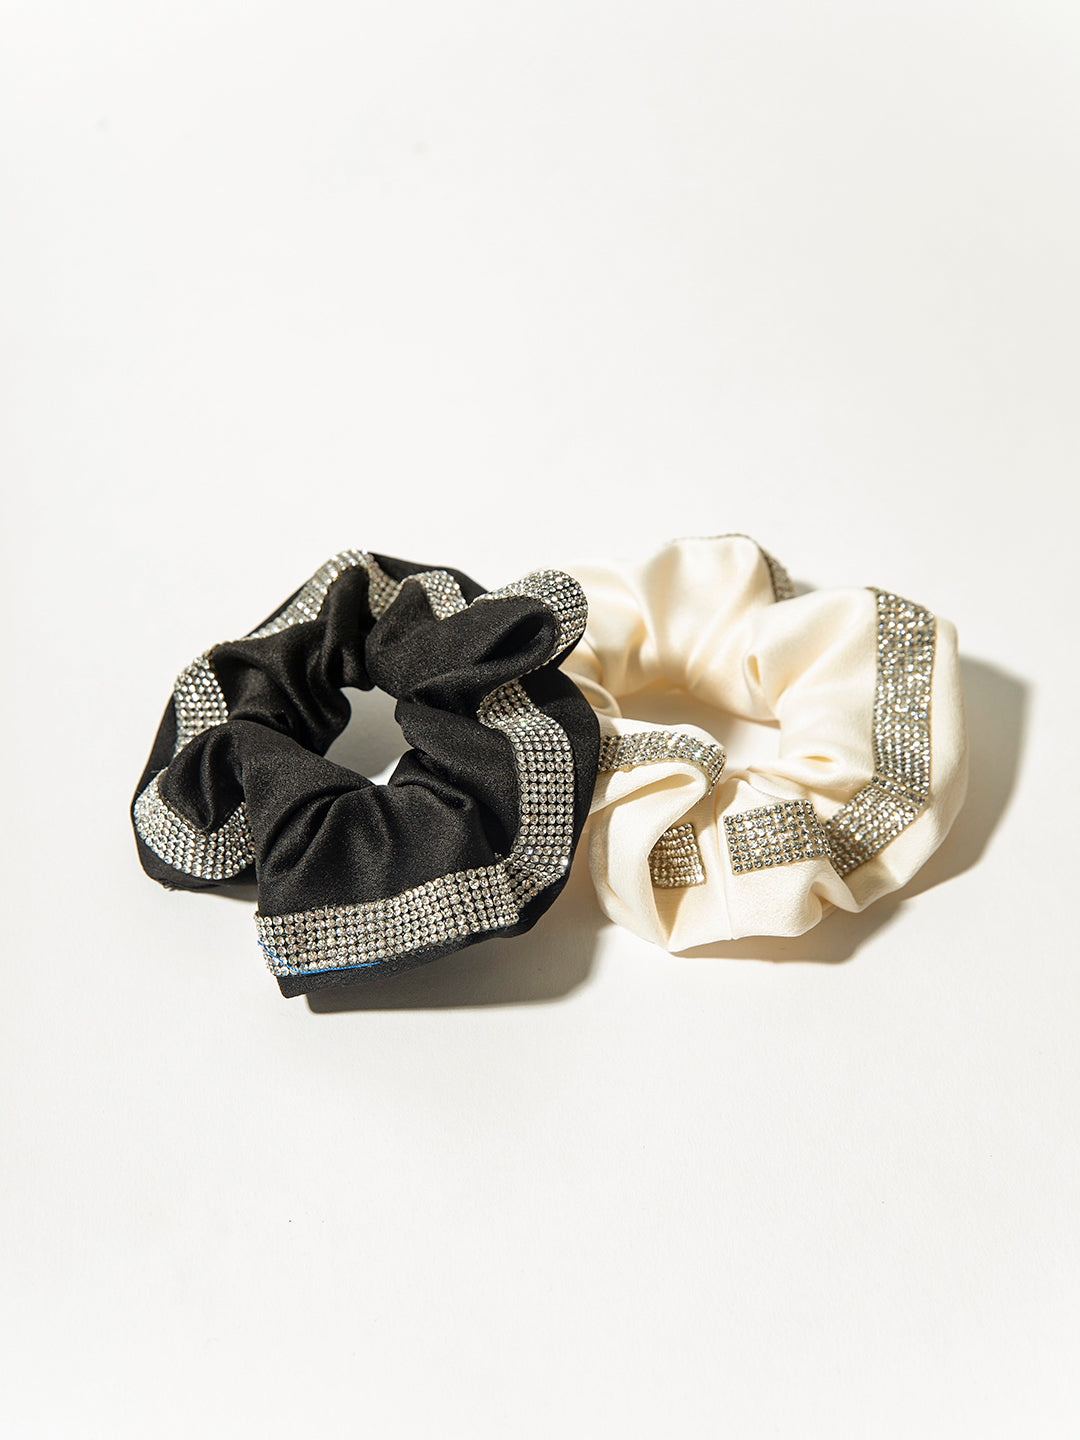 4 Inches Polyester Rhinestone Hair Scrunchies - Pack of 2